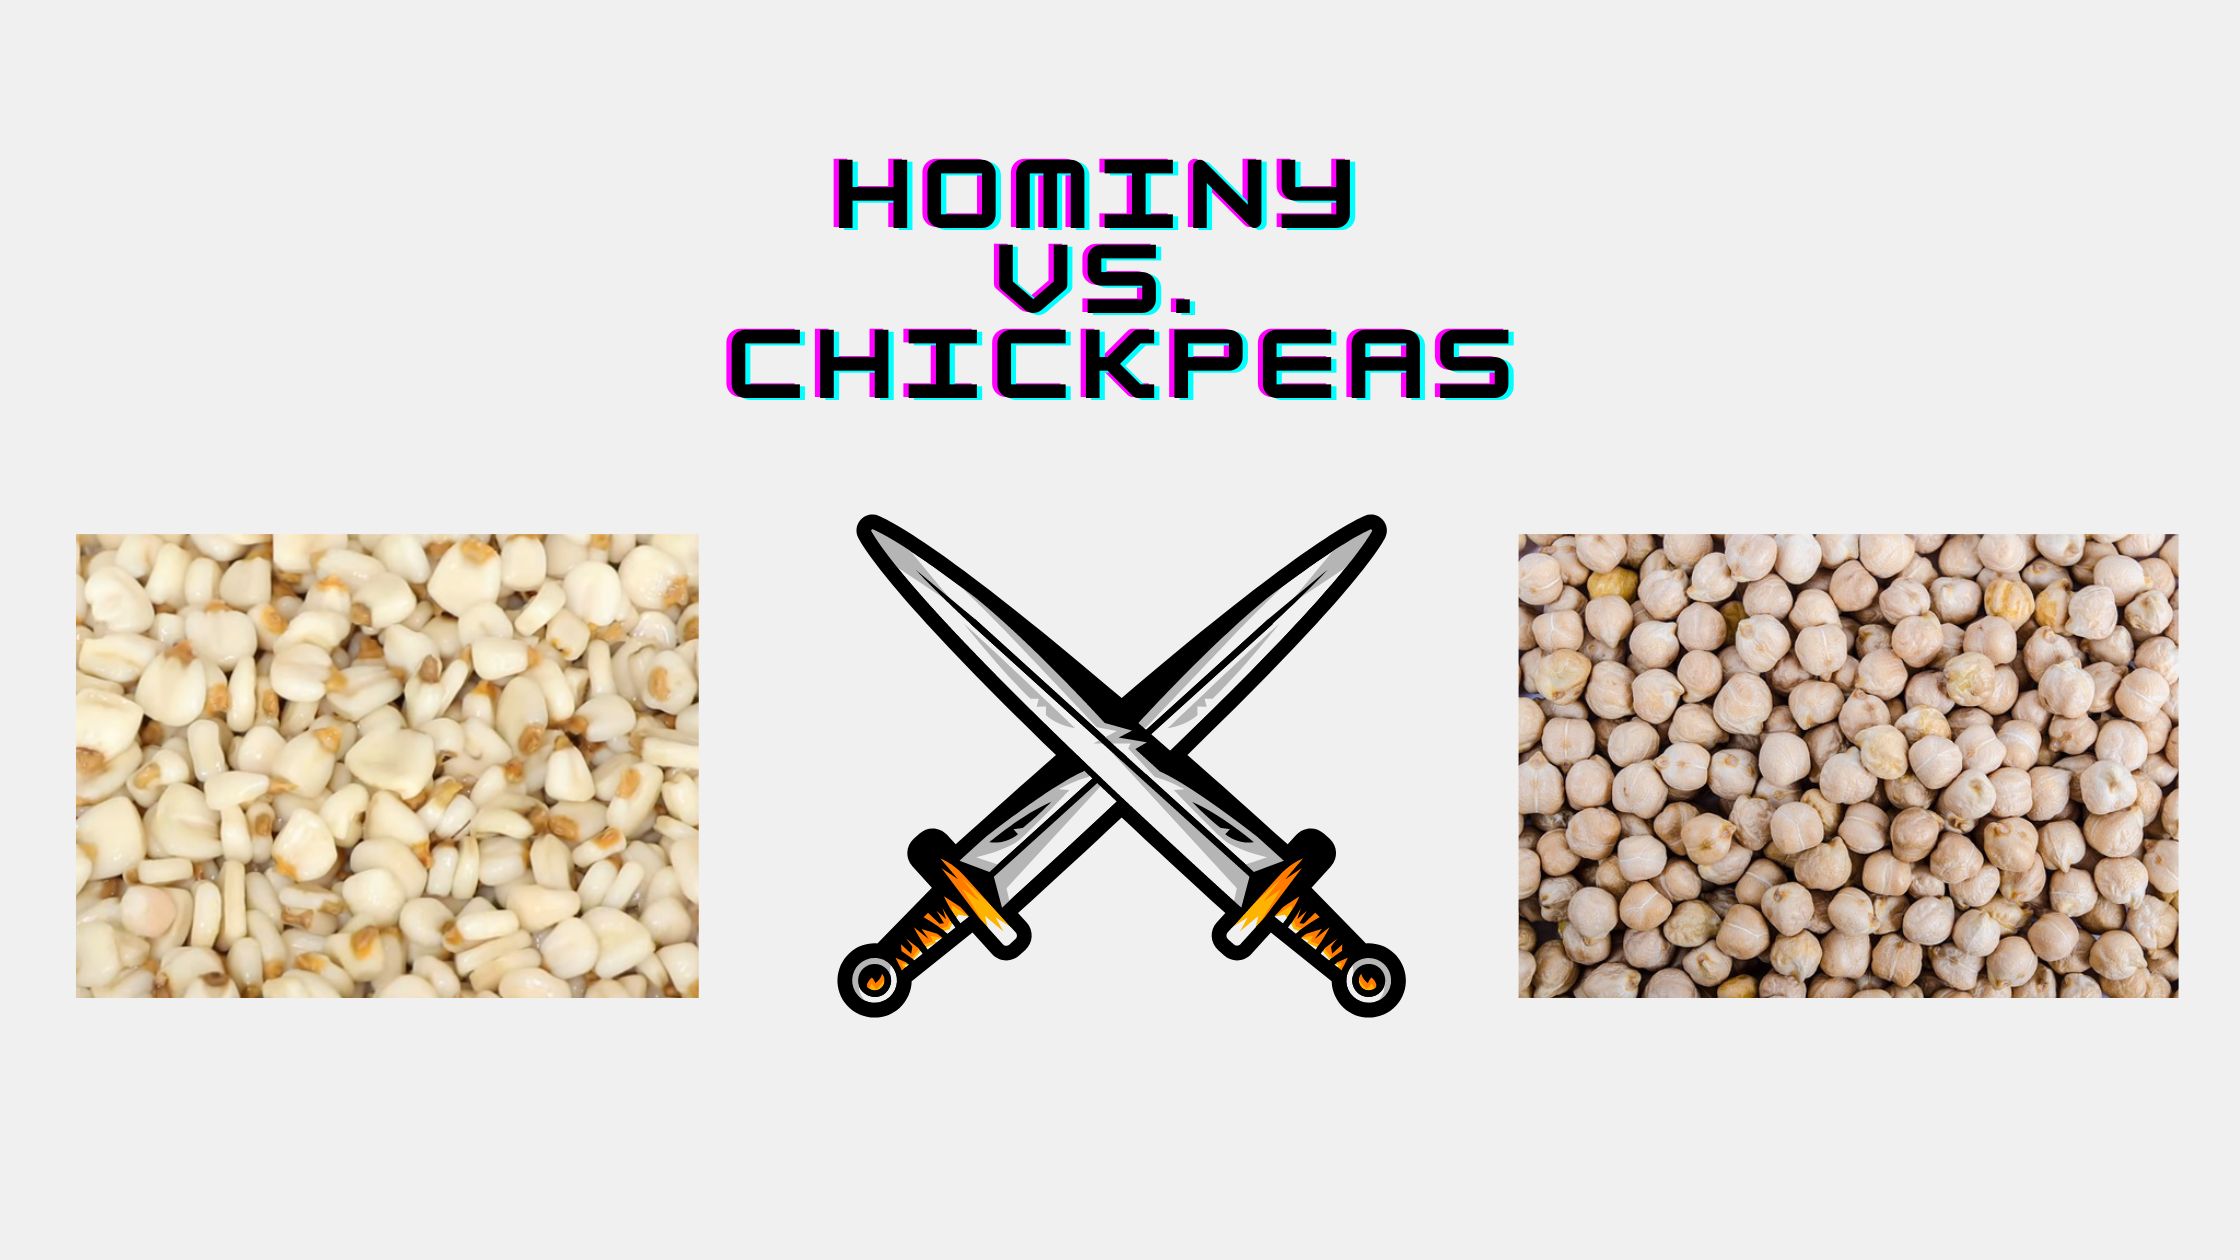 Can I substitute hominy for chickpeas